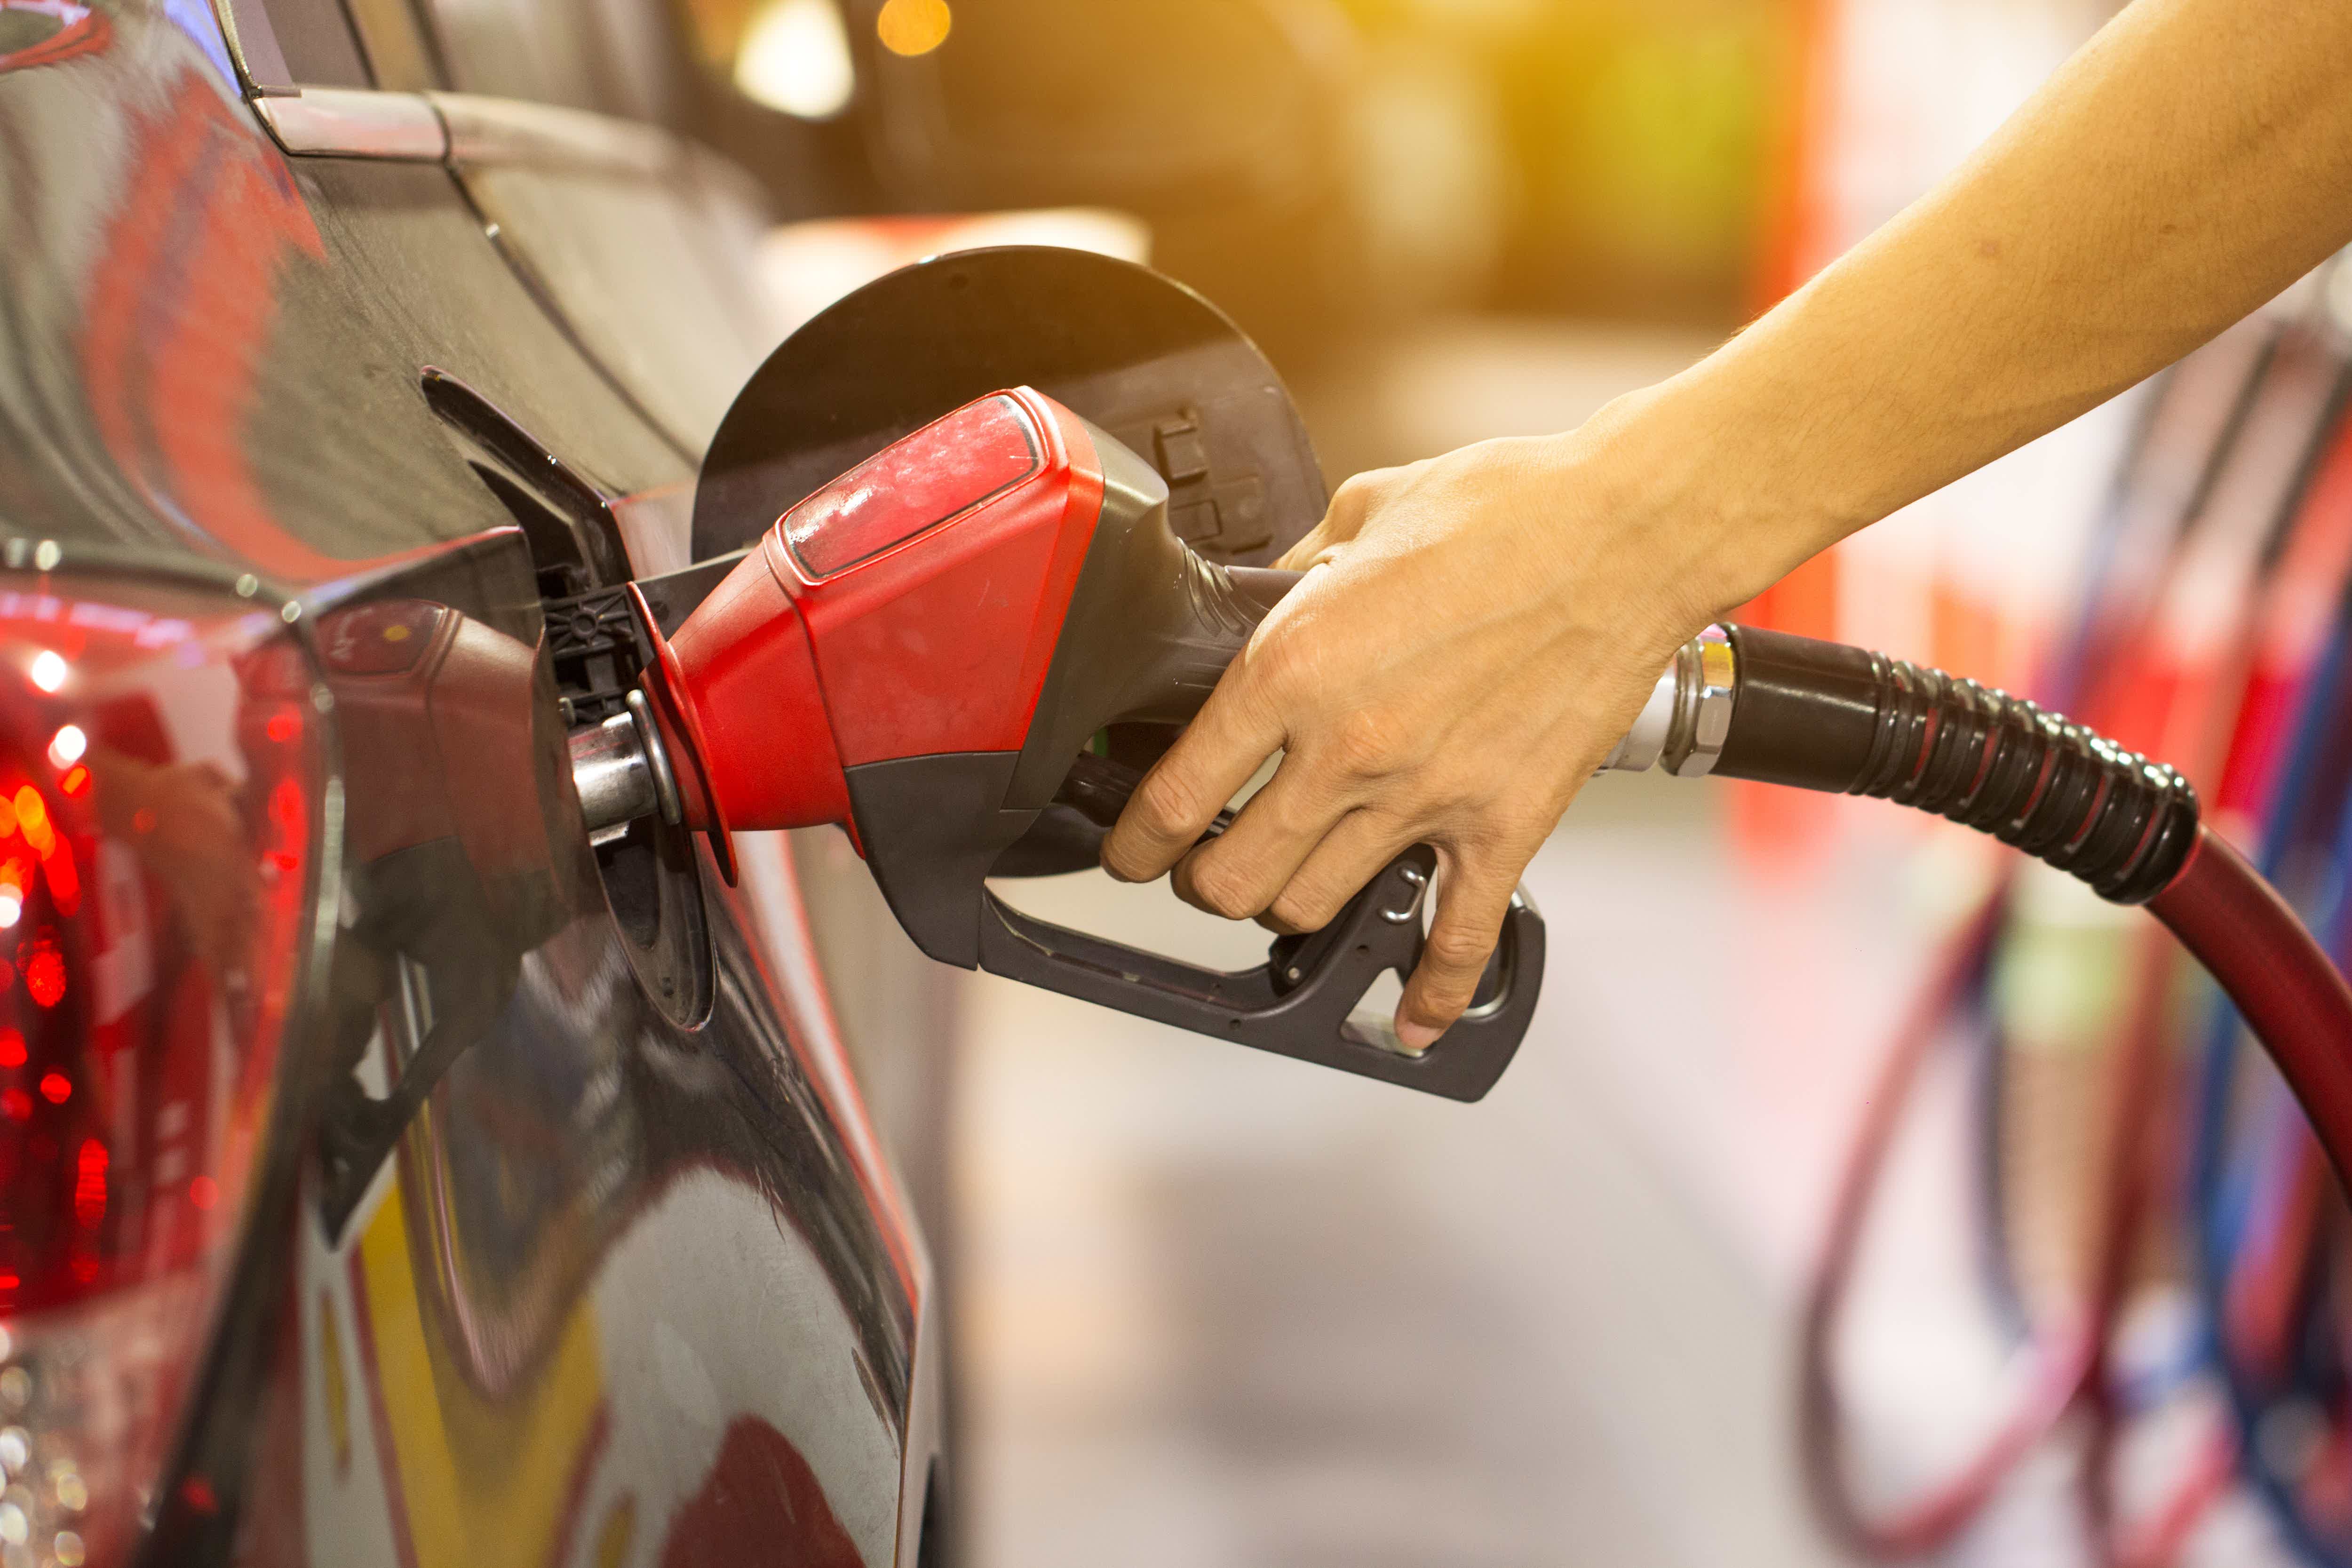 Find the best cash back cards for gas purchases! Source: Adobe Stock